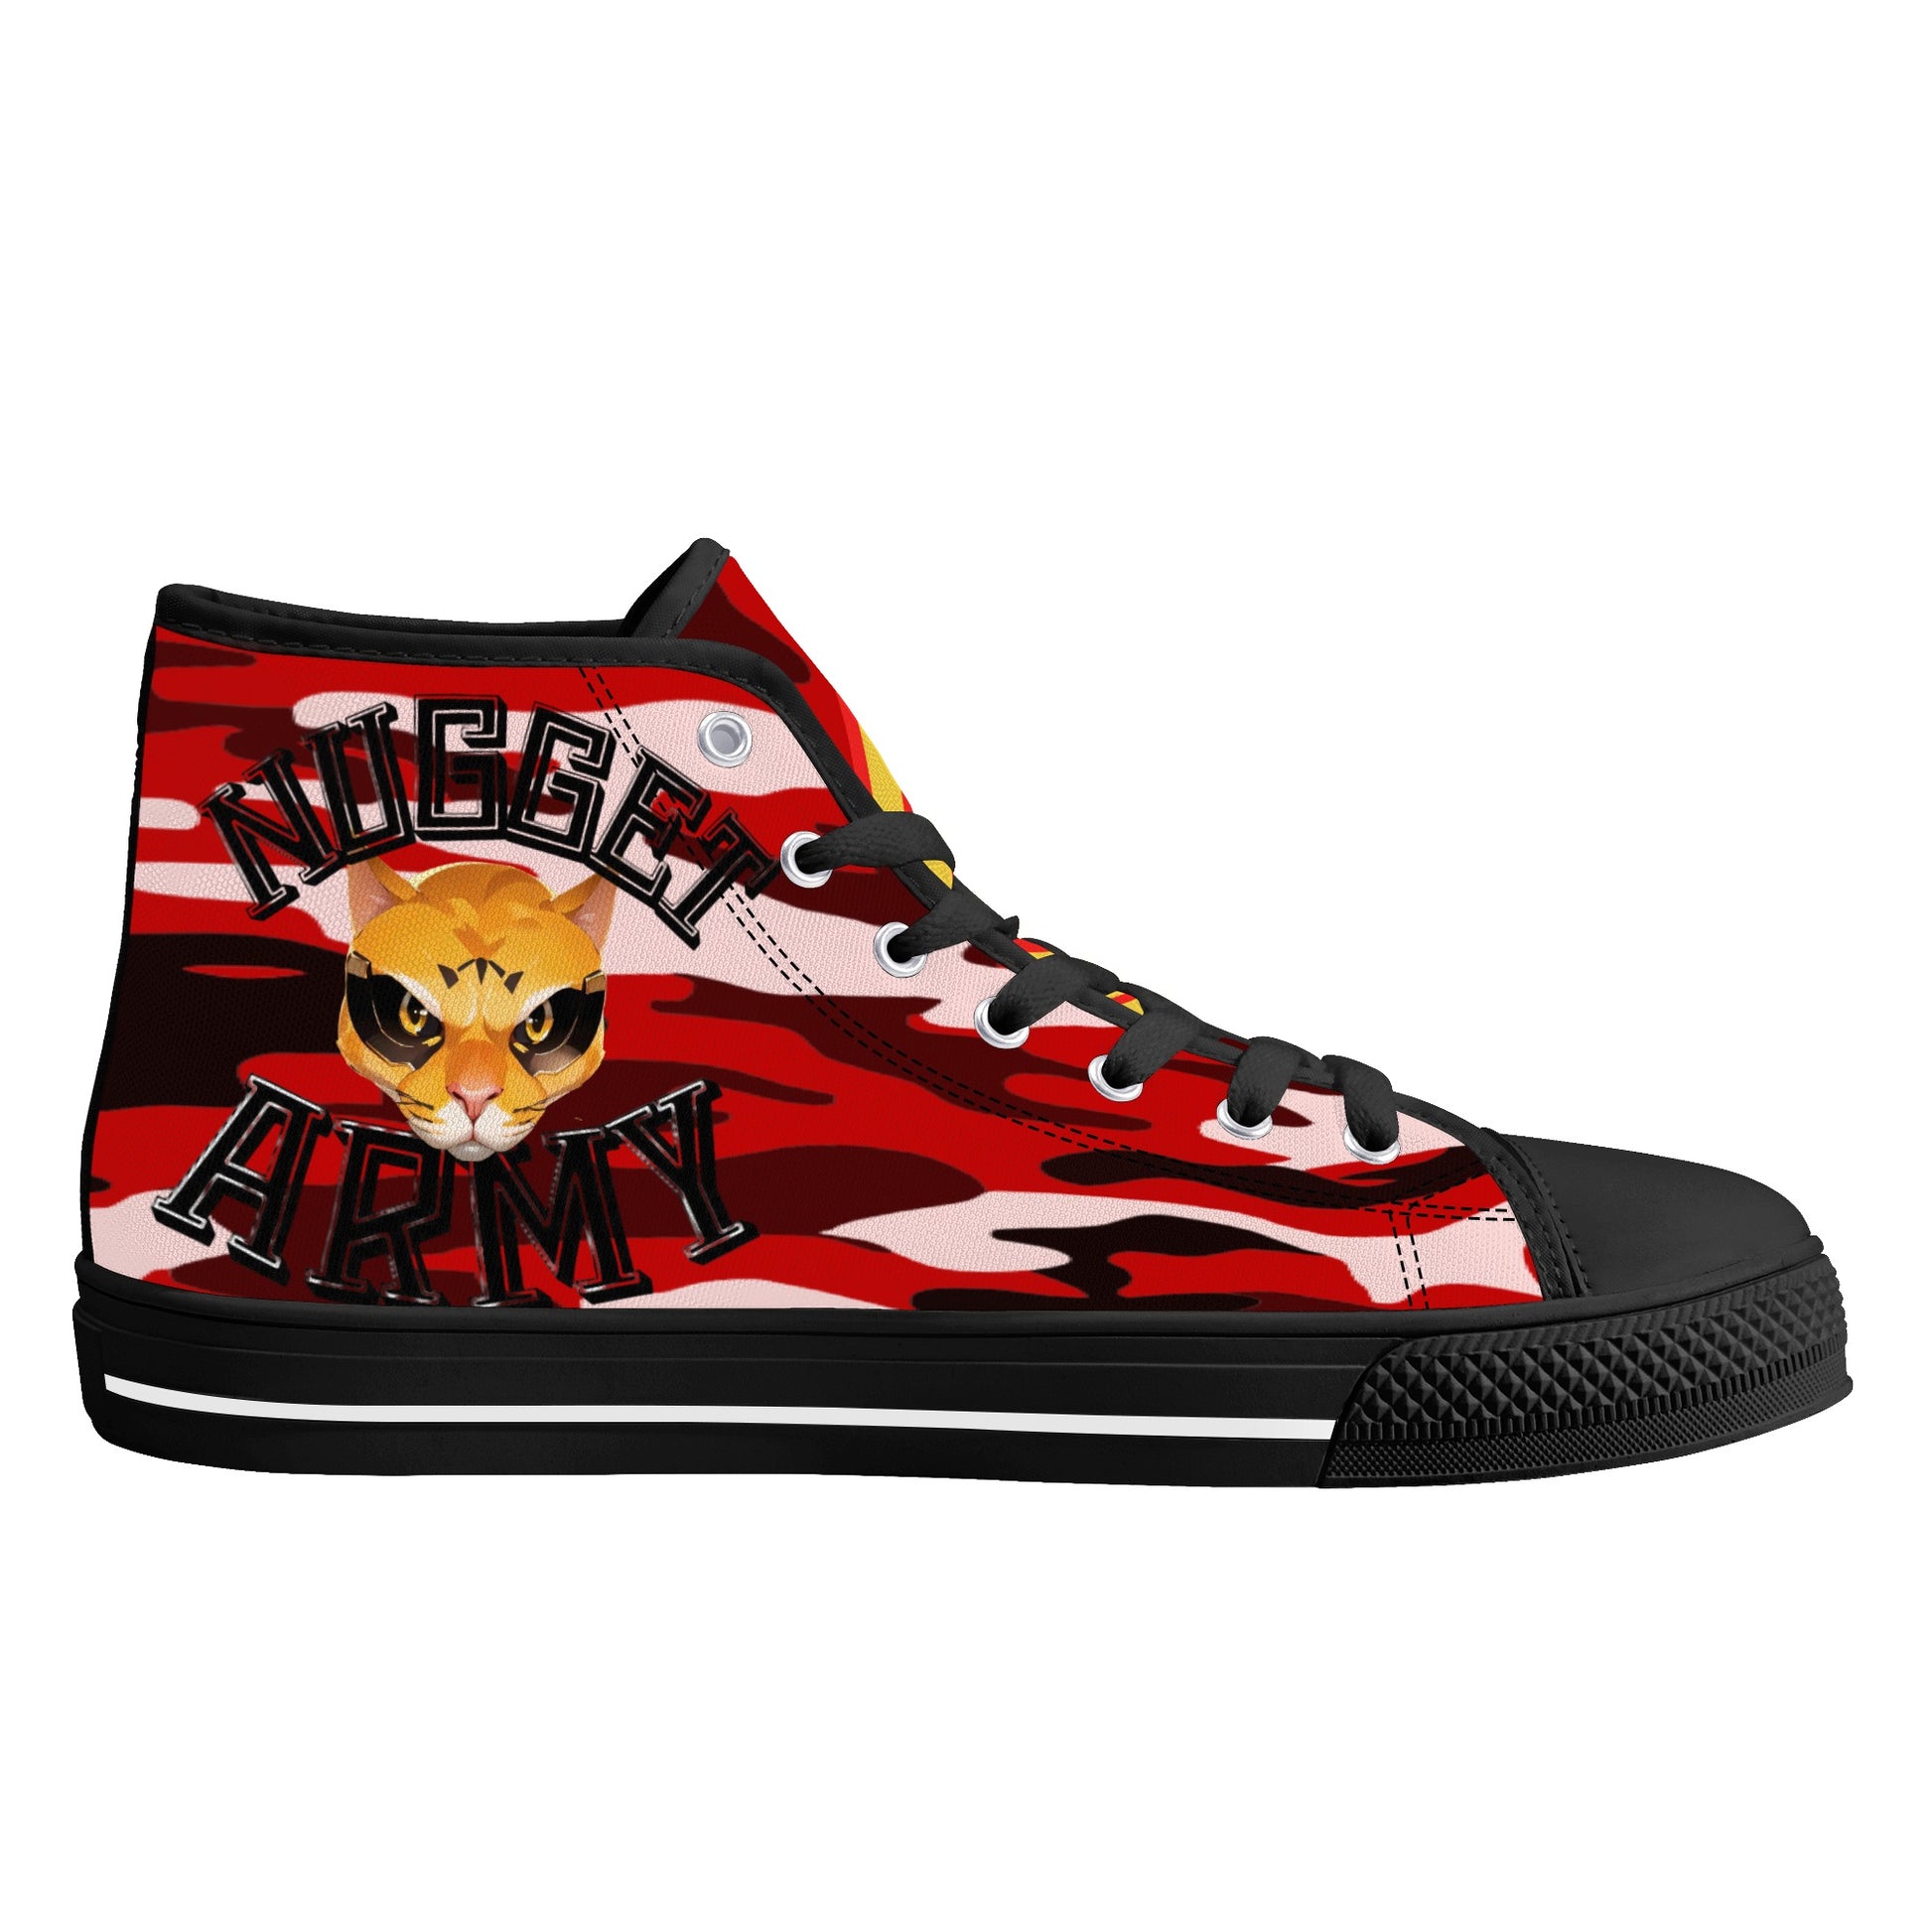 Stand out  with the  Nugget Army  Womens High Top Canvas Shoes  available at Hey Nugget. Grab yours today!